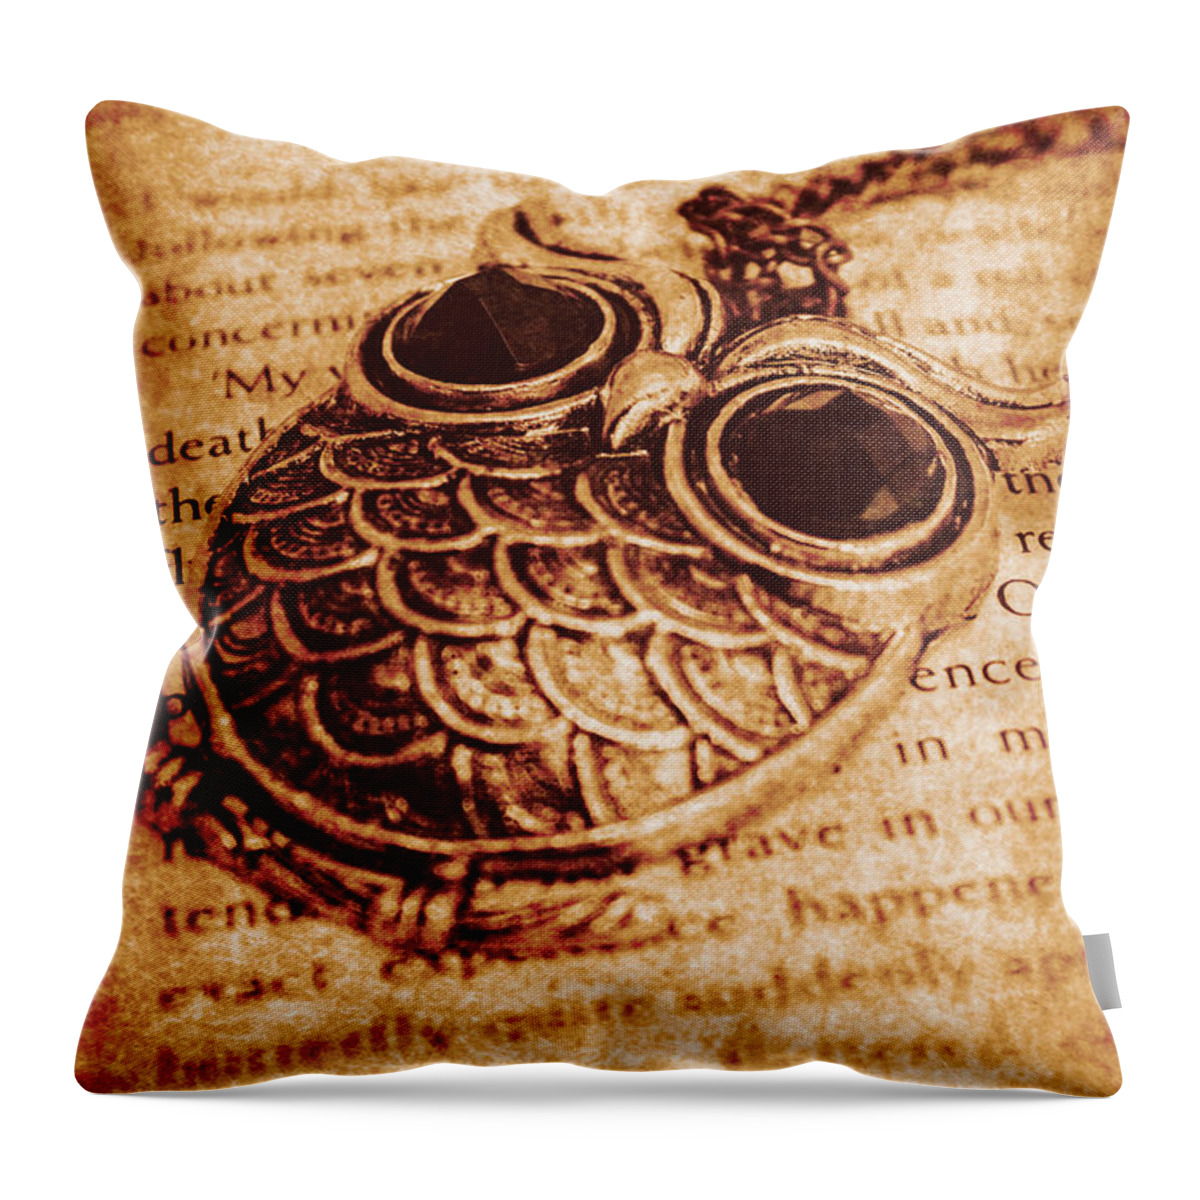 Owl Throw Pillow featuring the photograph Wise words and keepsakes by Jorgo Photography